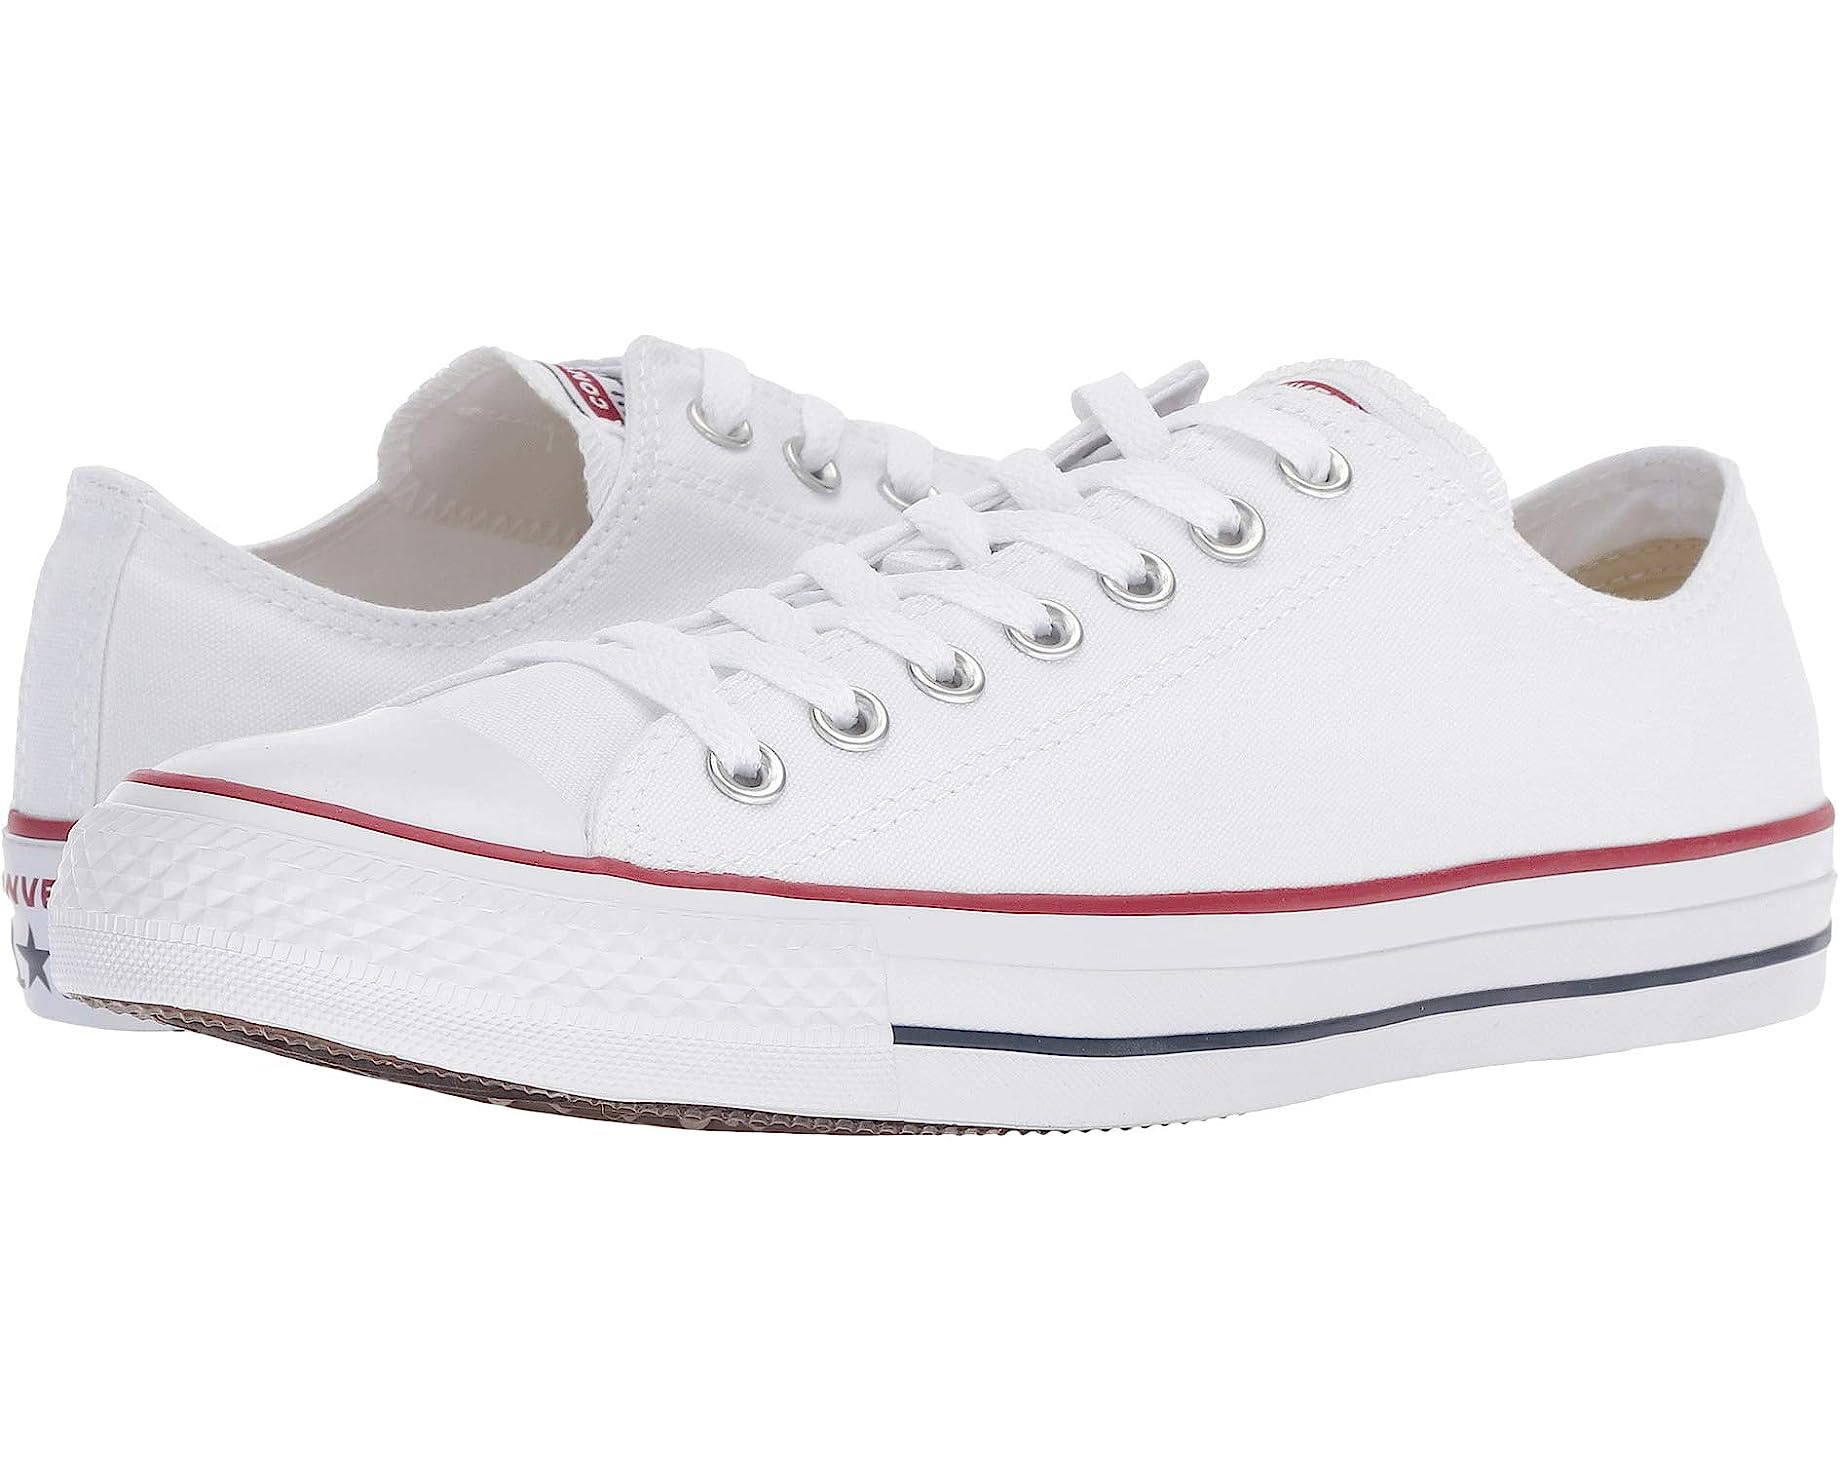 Converse Men's Chuck Taylor All Star Sneakers - White